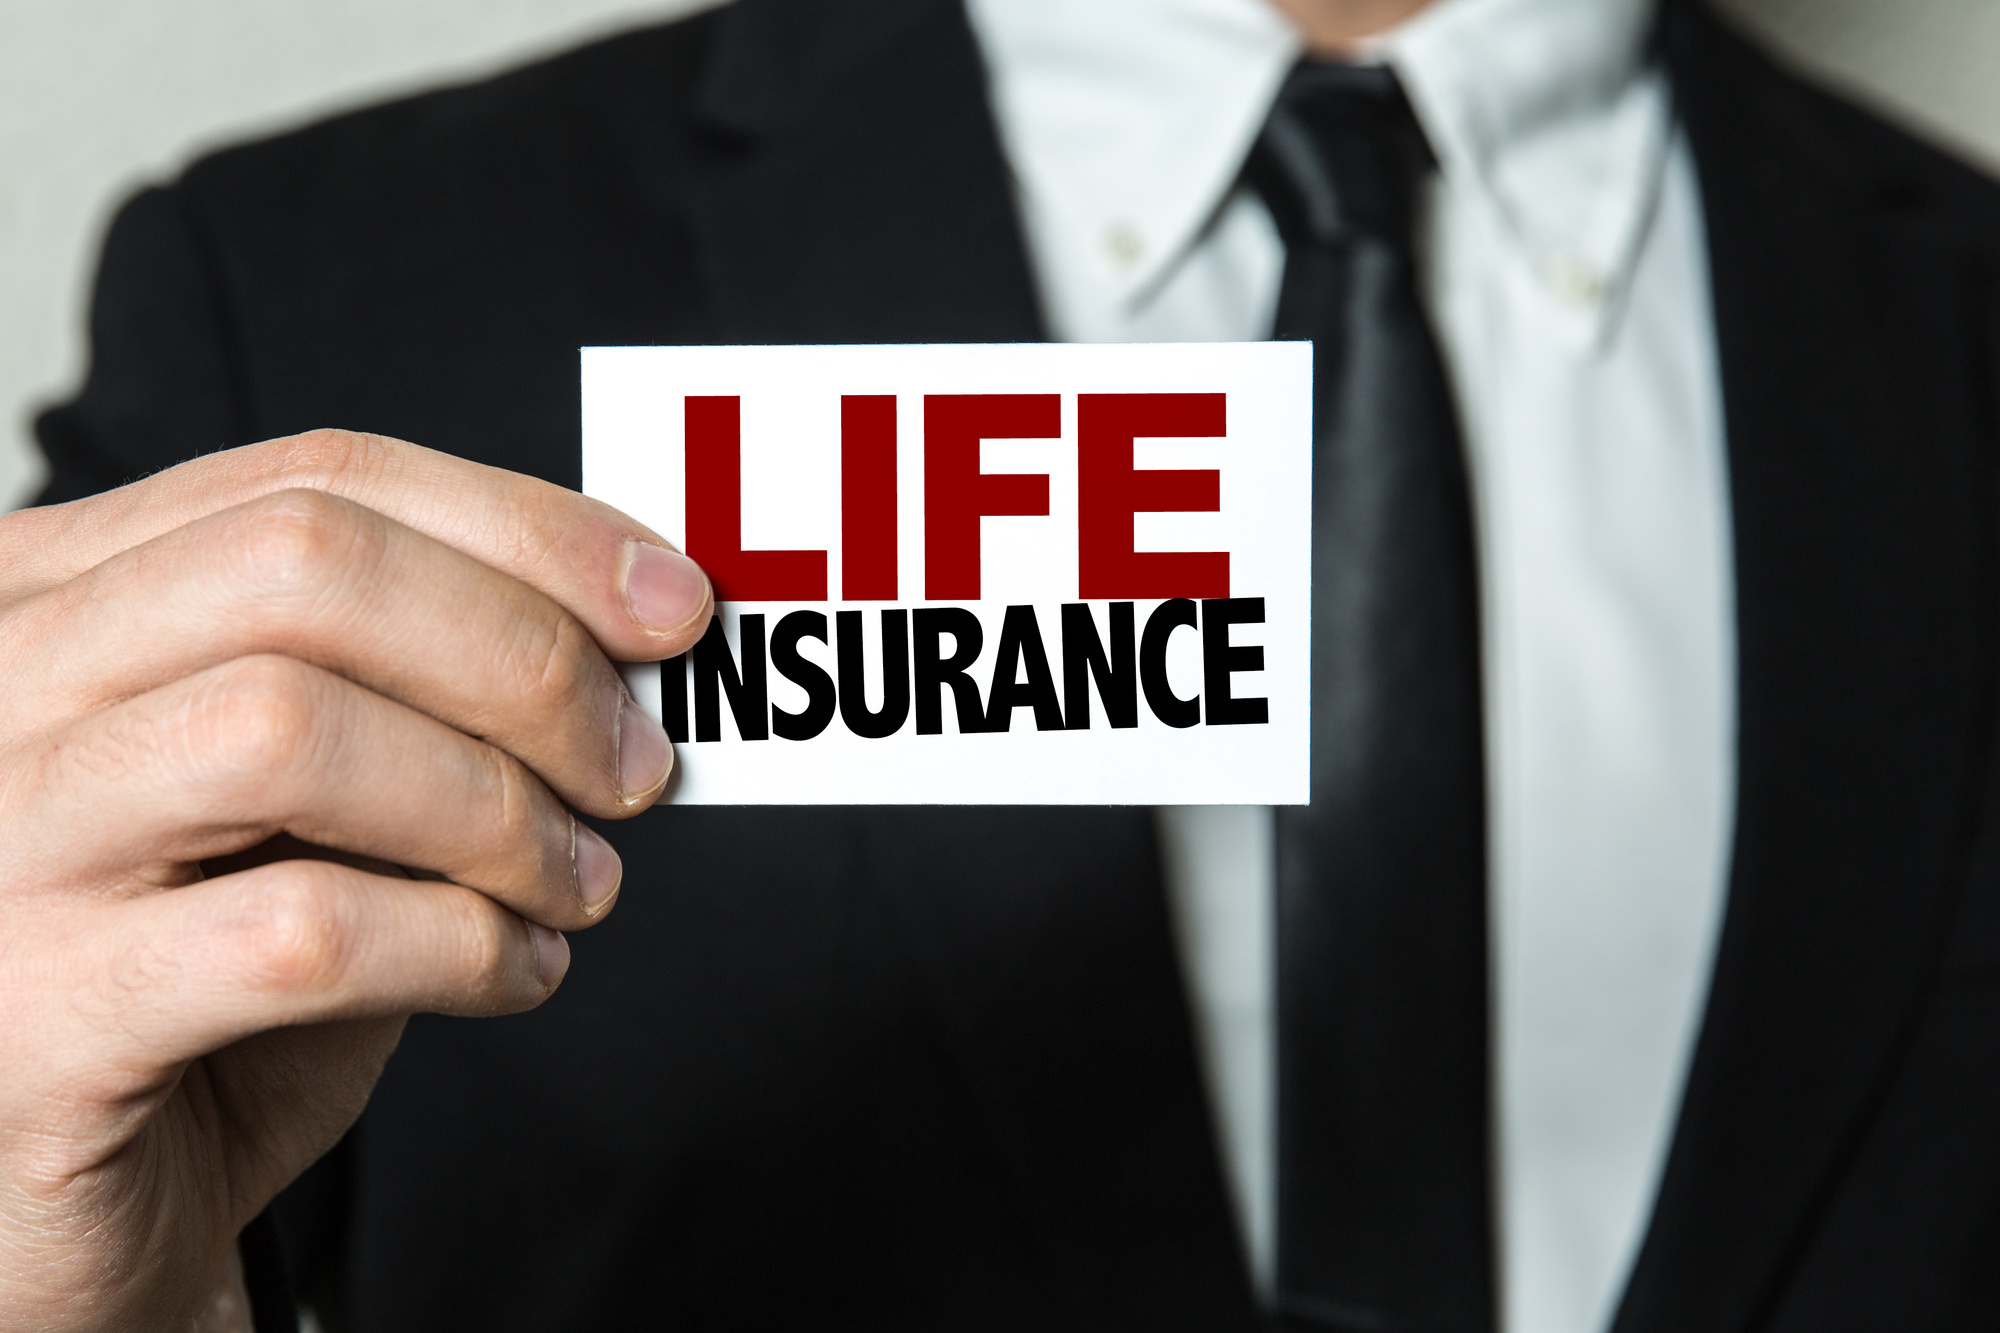 Did you know that not all life insurance companies are created equal these days? Here's how simple it actually is to choose the best life insurance agent.